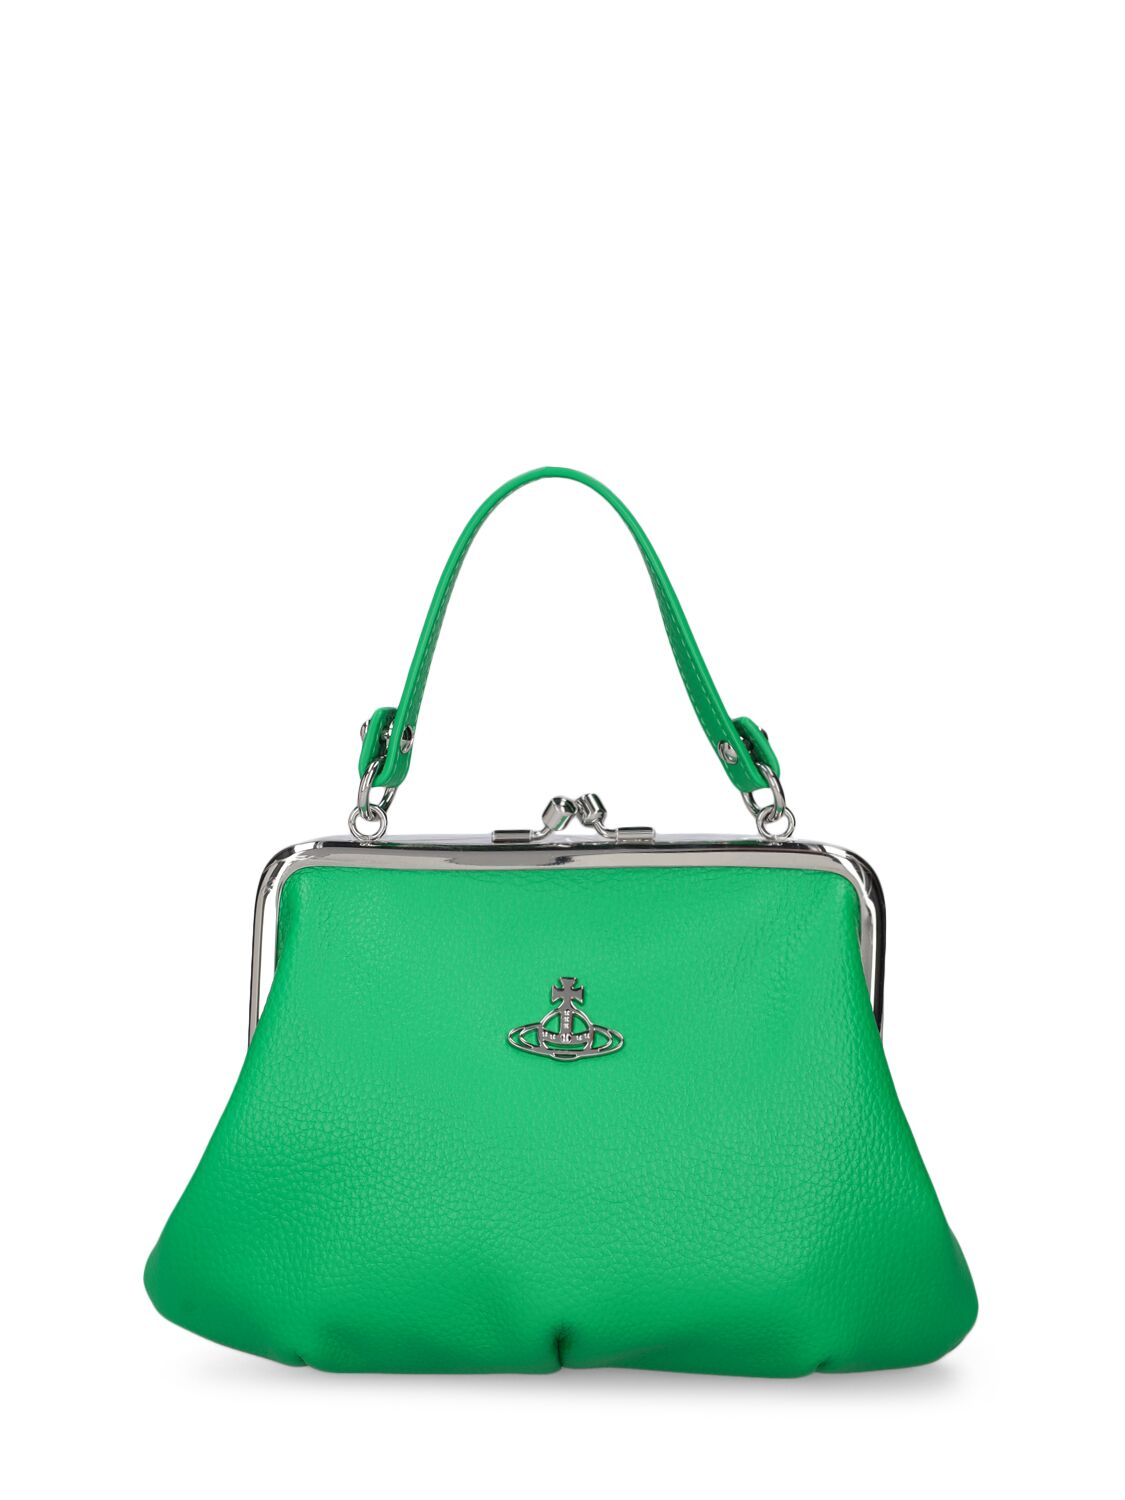 Shop Vivienne Westwood Granny Frame Faux Leather Bag In Bright Green